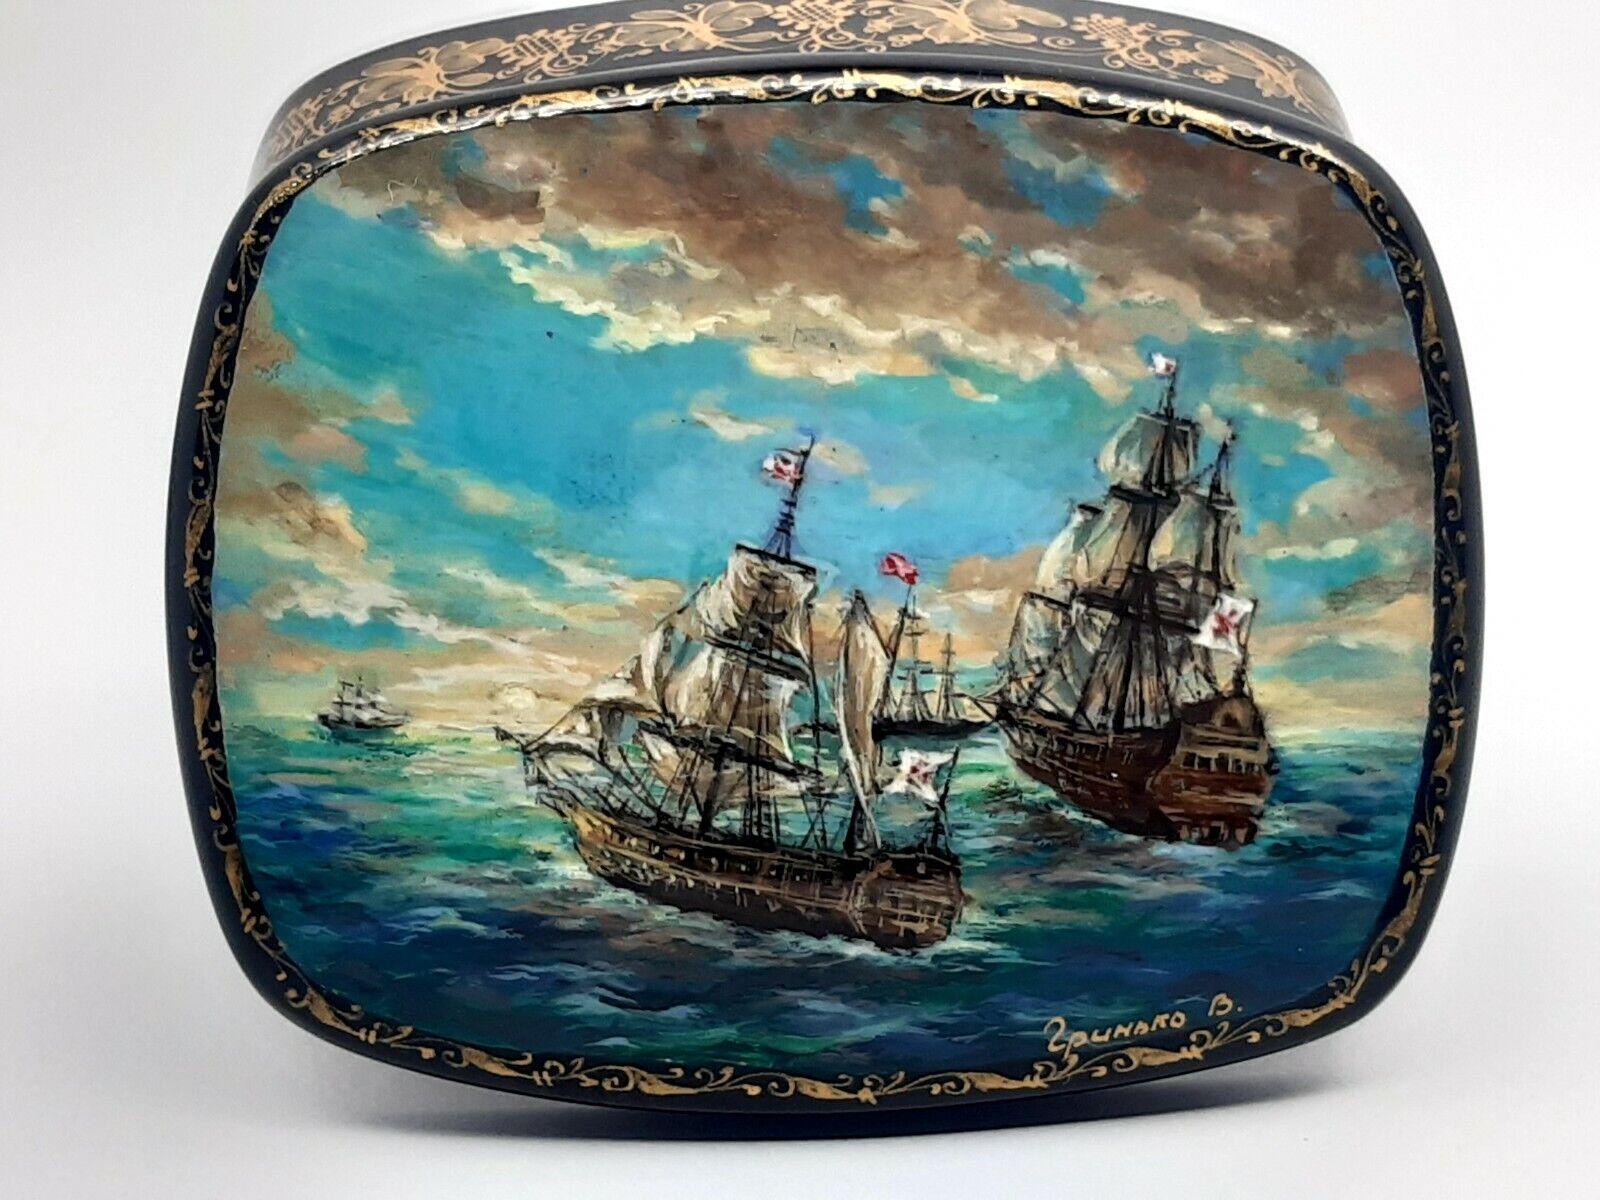 Seascape Ukrainian lacquer box “Ships in the sea” by Grinko Hand made in Ukraine